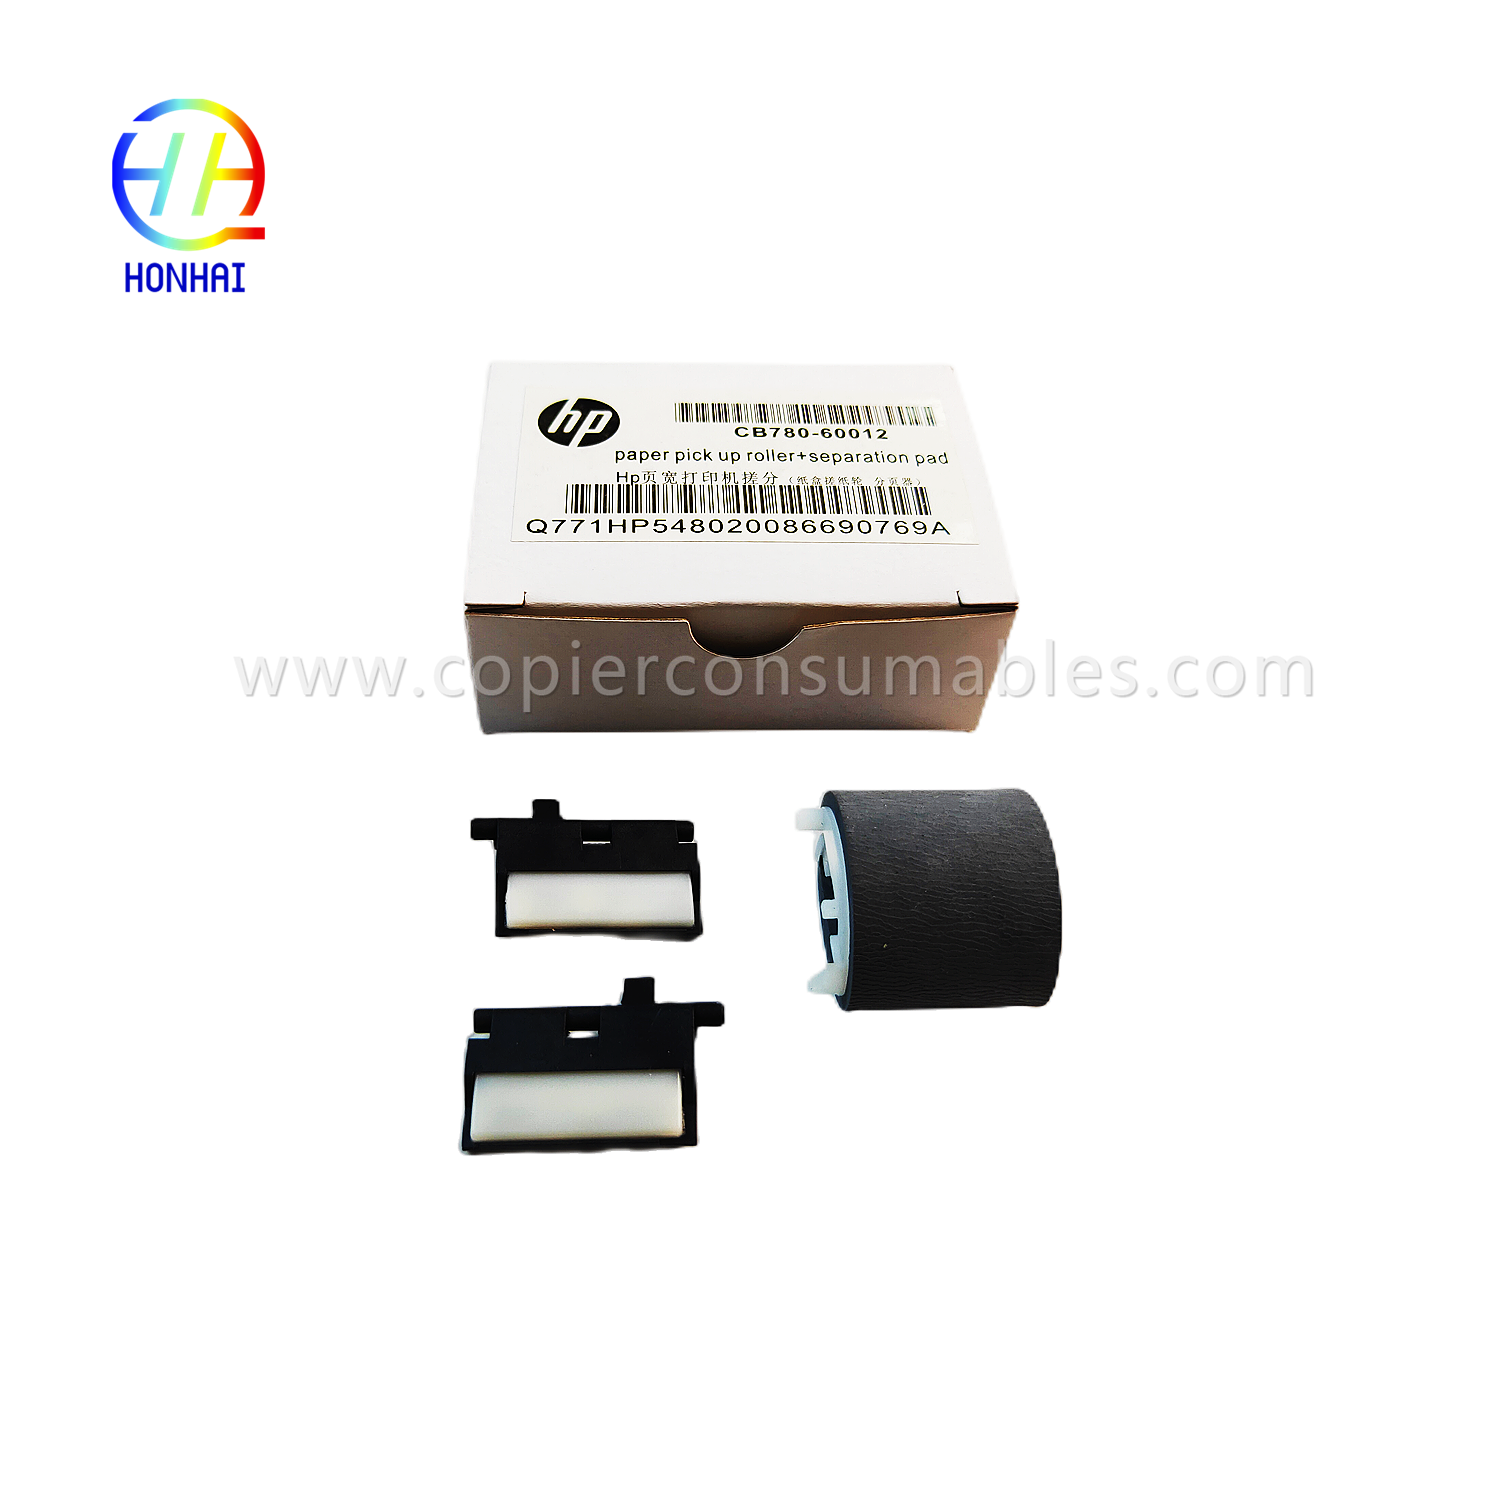 https://www.copierconsumables.com/paper-pickup-roller-separates-pad%ef%bc%88set%ef%bc%89for-hp-pagewide-x585z-x451dn-x476dn-x551dw-x576dw-556dn-586- 452dn-477dn-552-577z-cb780-60012-продукт/